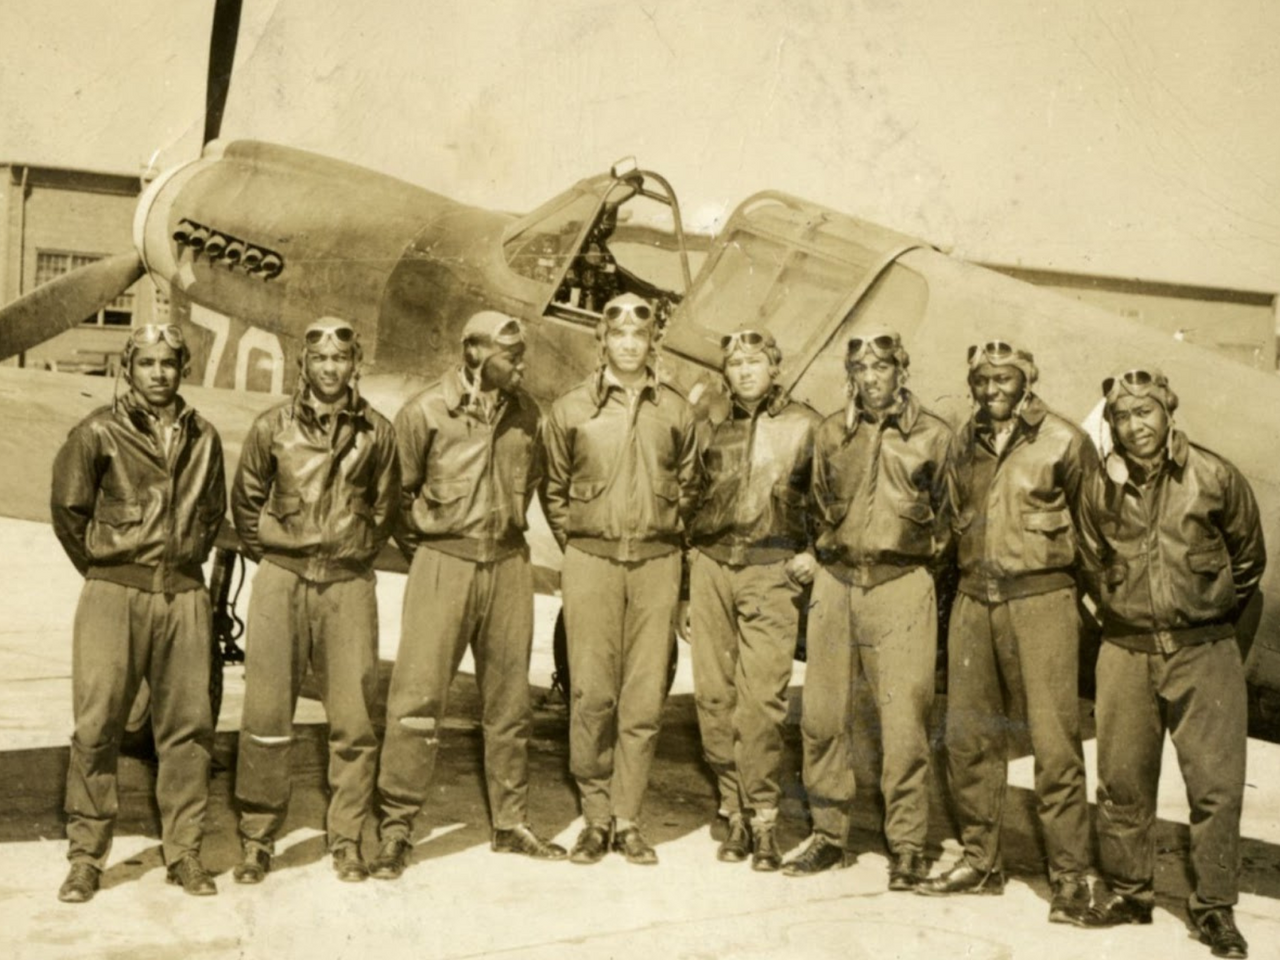 Group of WwII airmen posed by airplane at Tuskegee Army Airfield